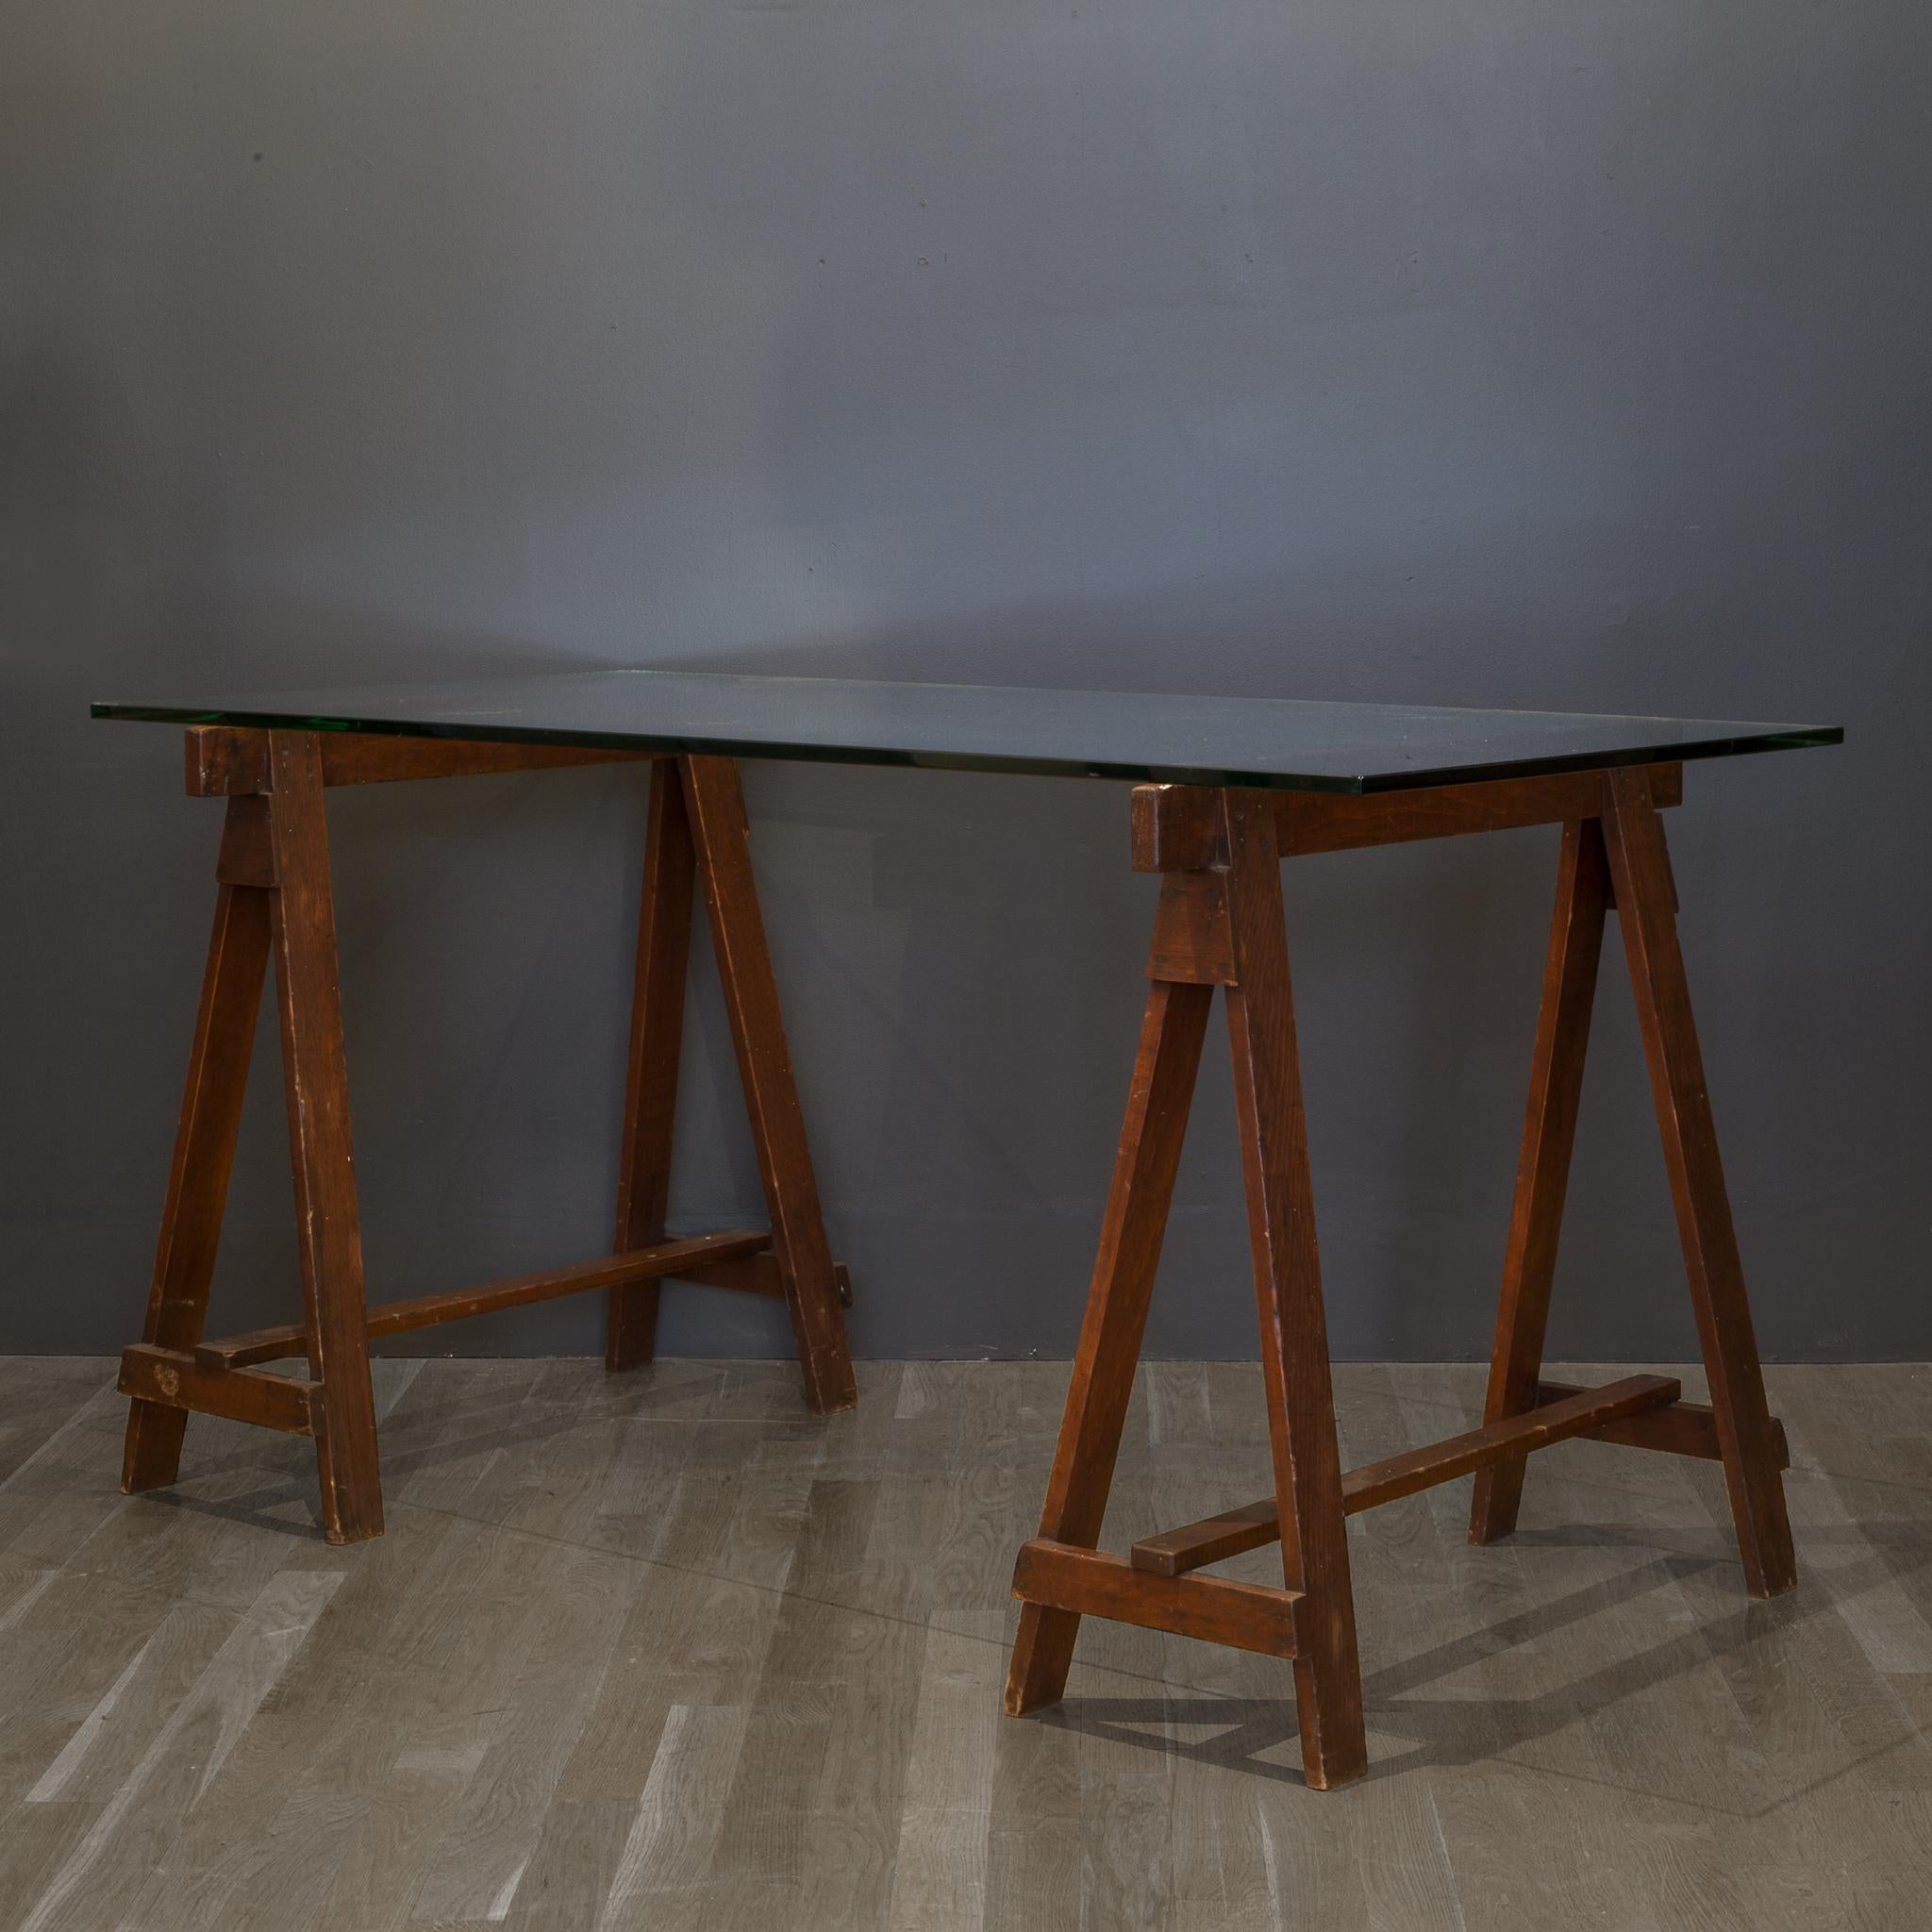 Rustic Glass Dining Table with Early 20th Century Douglas Fir Sawhorses, circa 1910